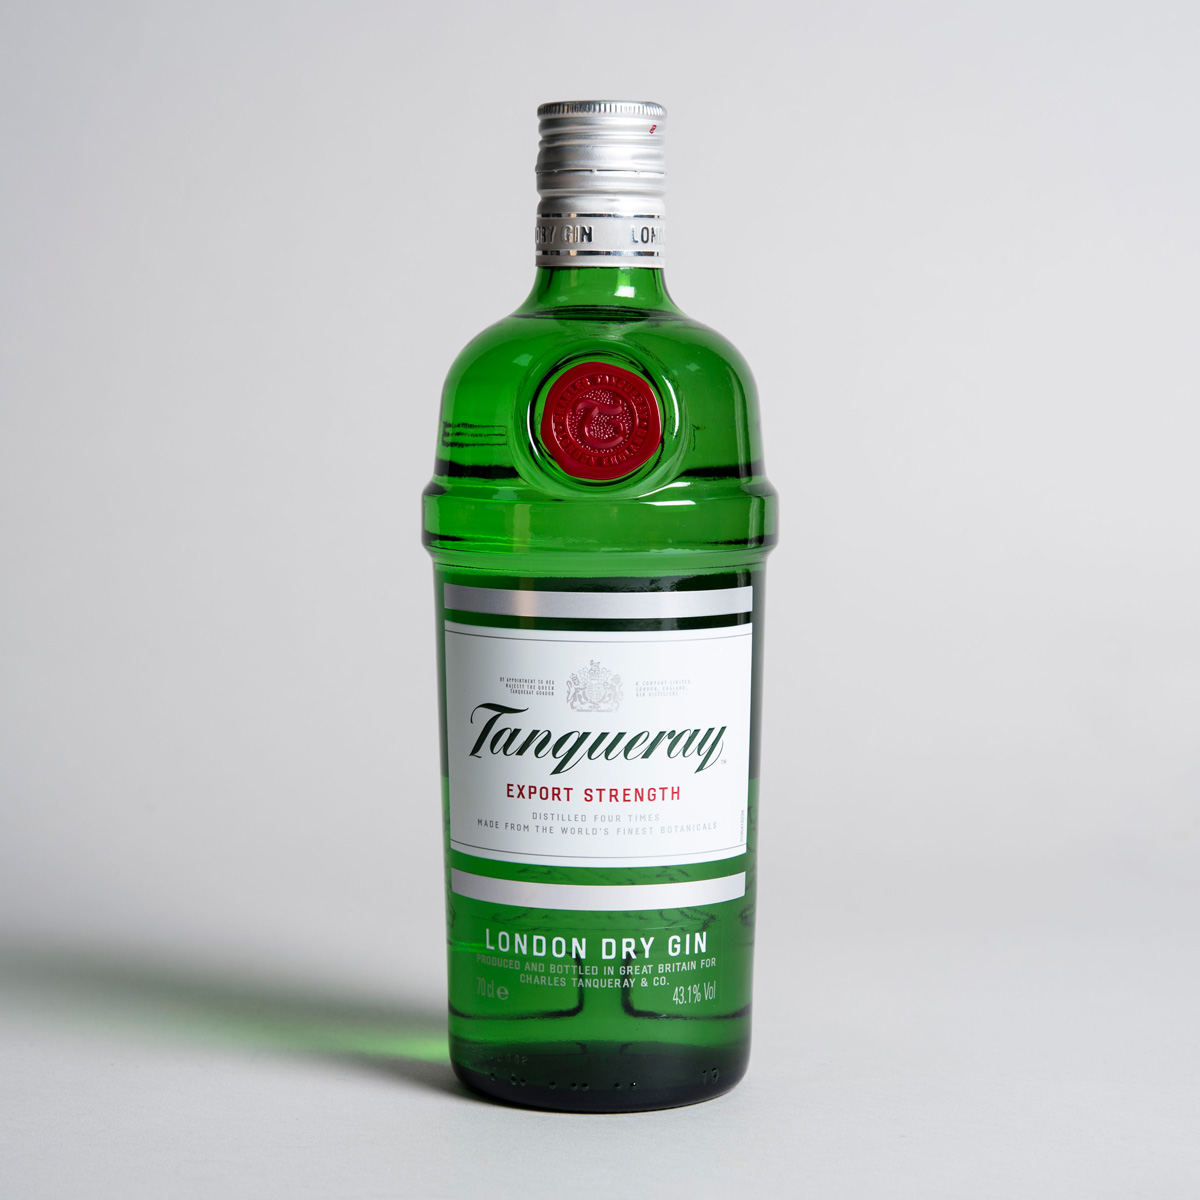 Engraved Wooden Box With Tanqueray Gin - Message